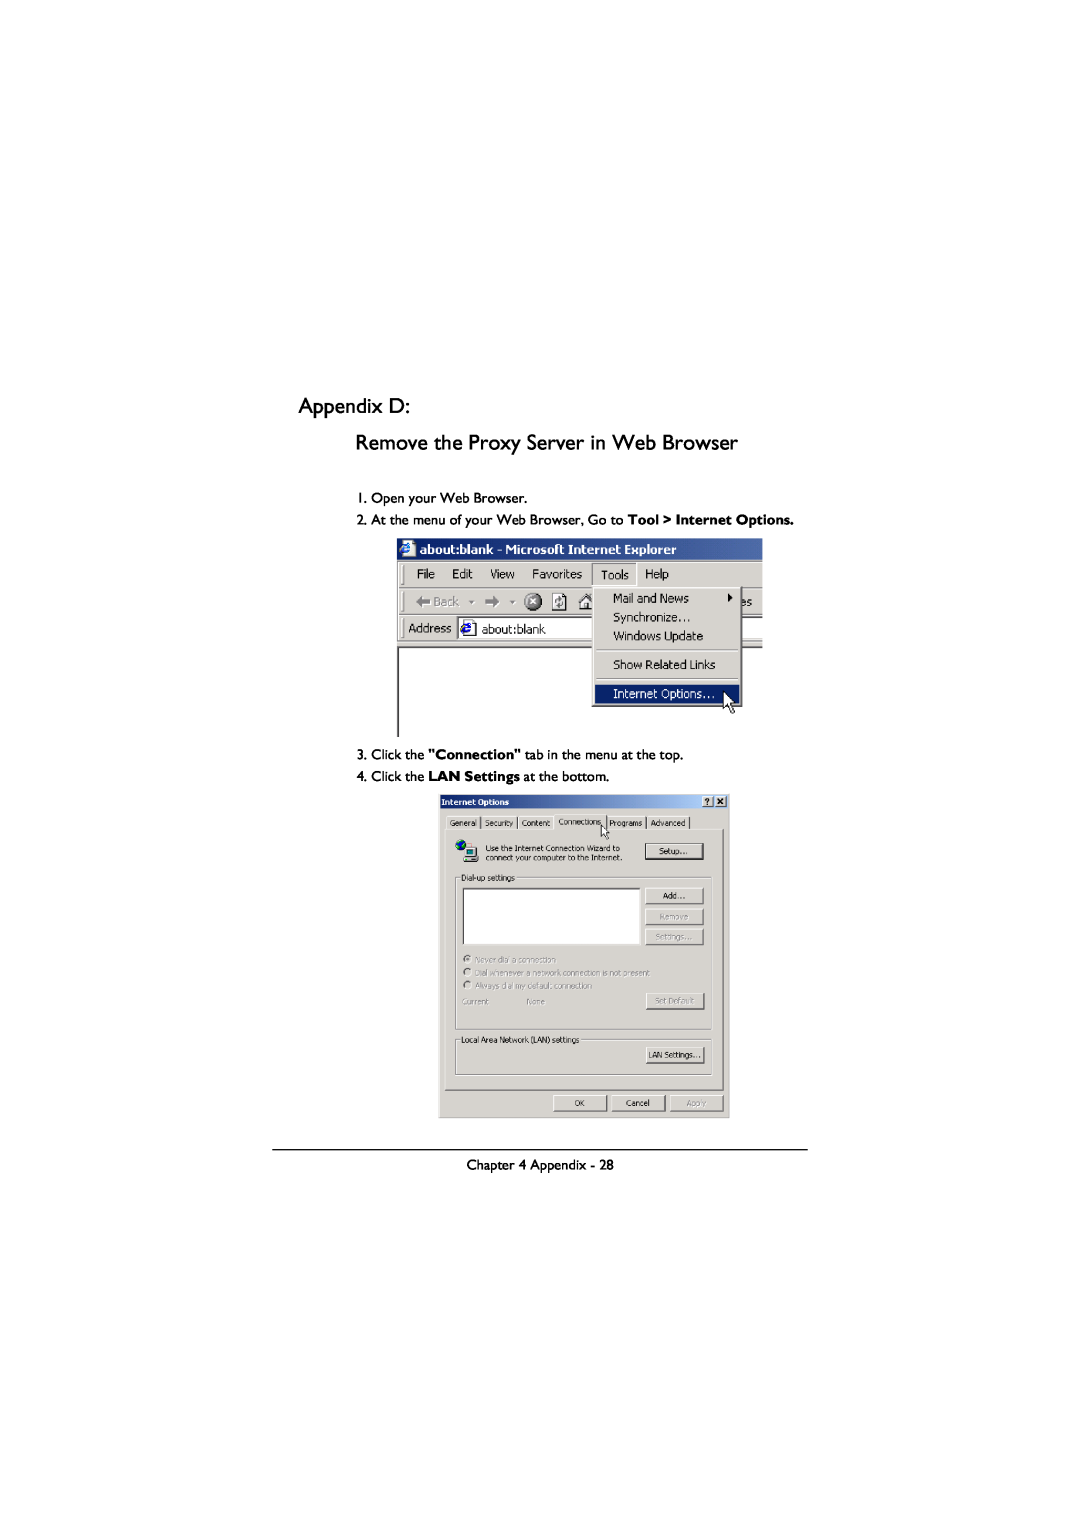 BenQ ESG-103 manual Appendix D Remove the Proxy Server in Web Browser, Open your Web Browser 